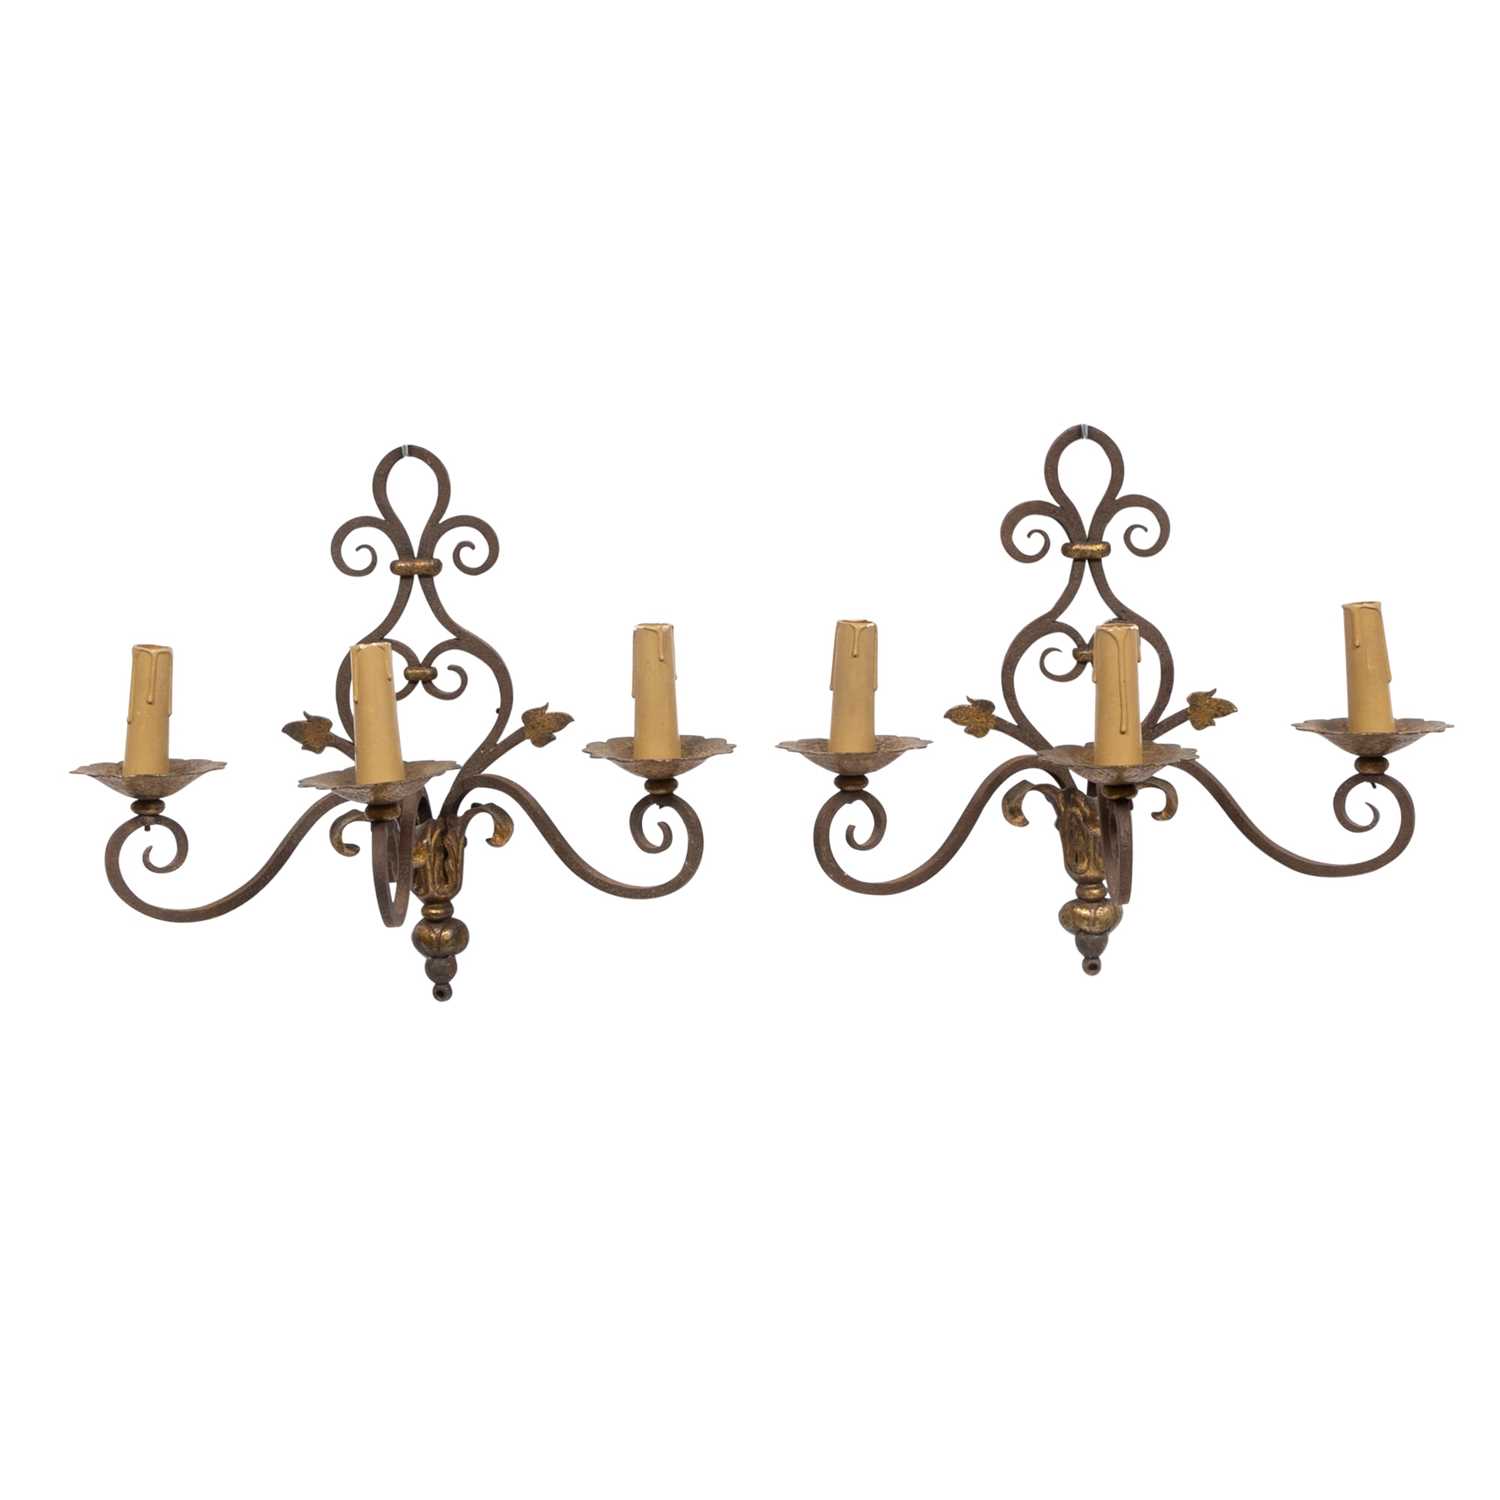 Lot 408 - Pair of Two-Light Iron Sconces